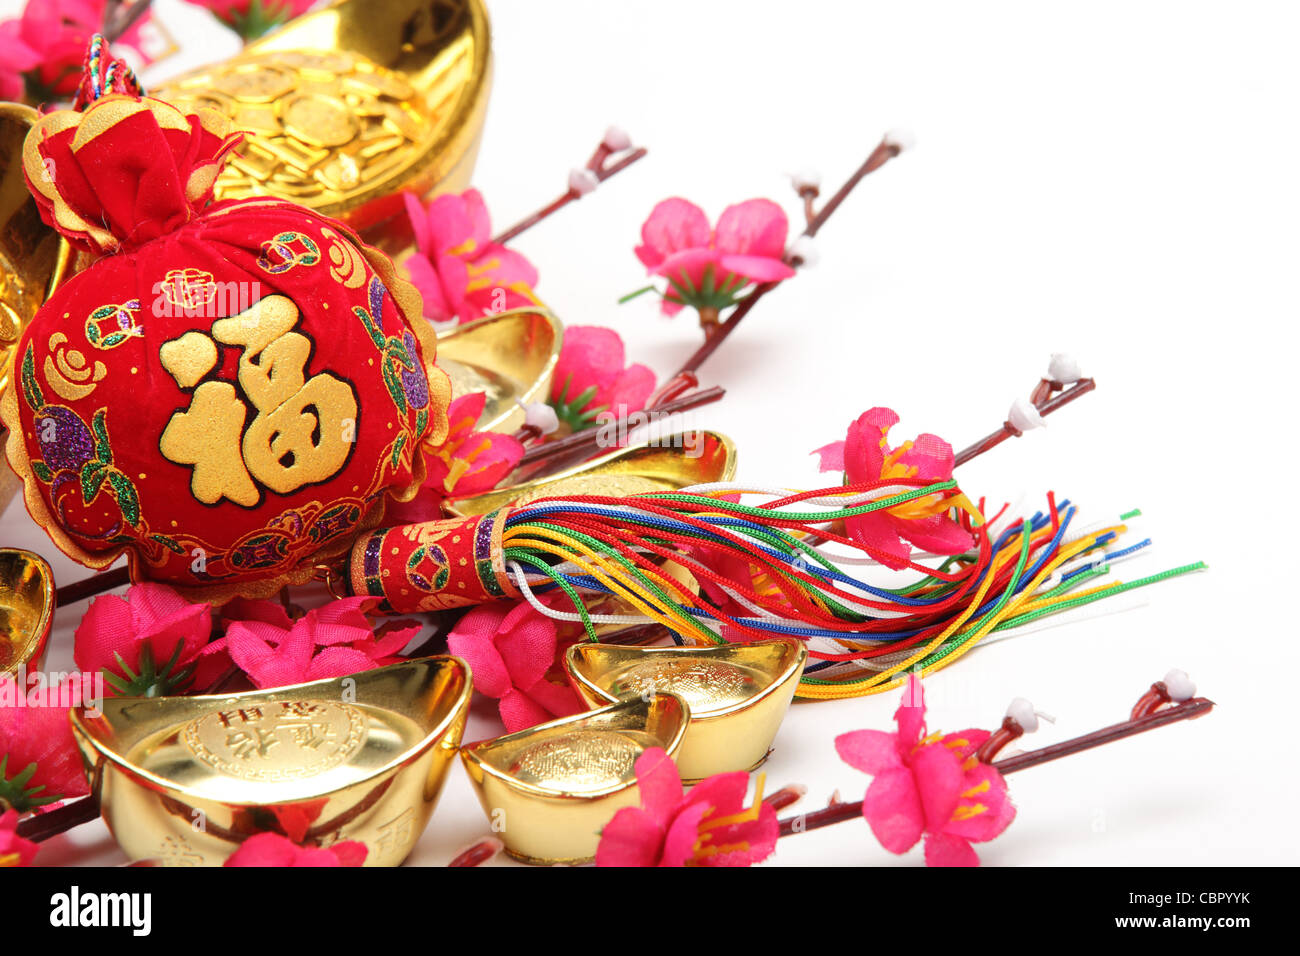 Chinese New Year Decorations,Closeup on money bag with gold ingots and plum blossom. Stock Photo